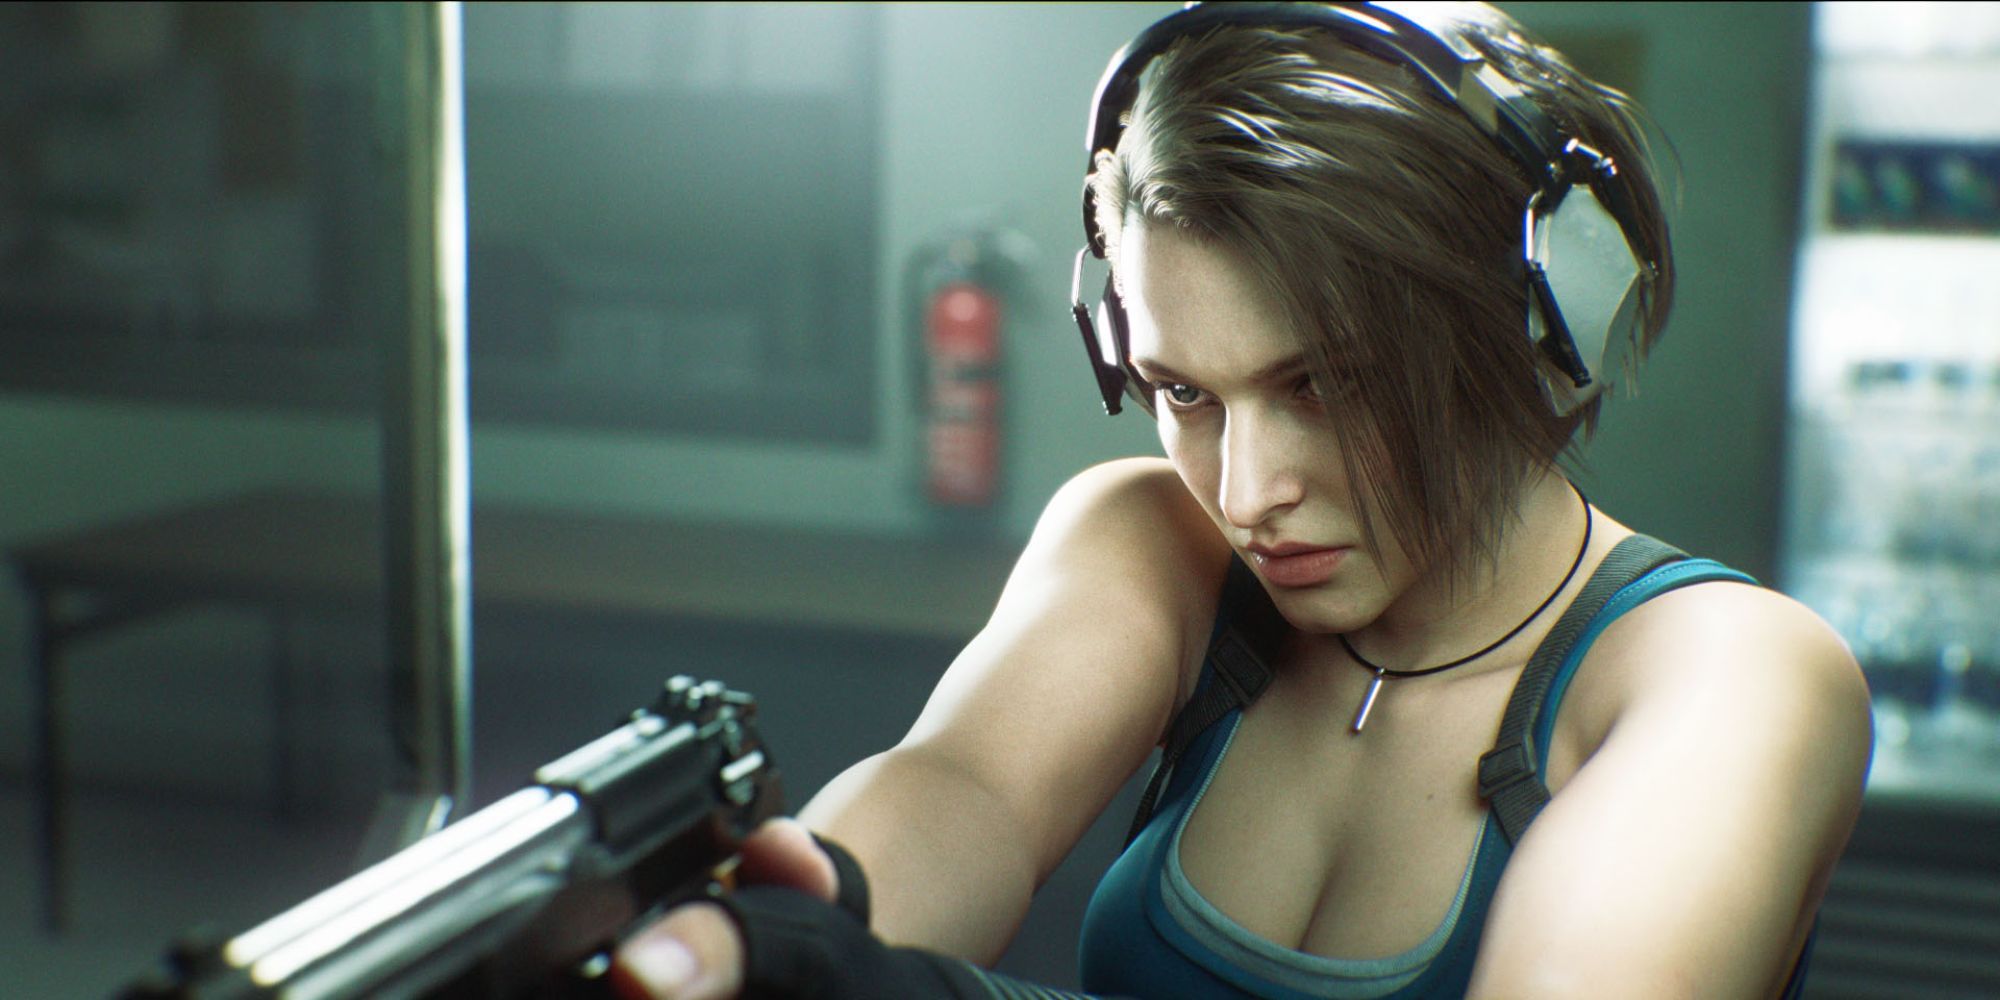 Resident Evil Death Island Explains Why Jill Valentine Doesn't Look Older